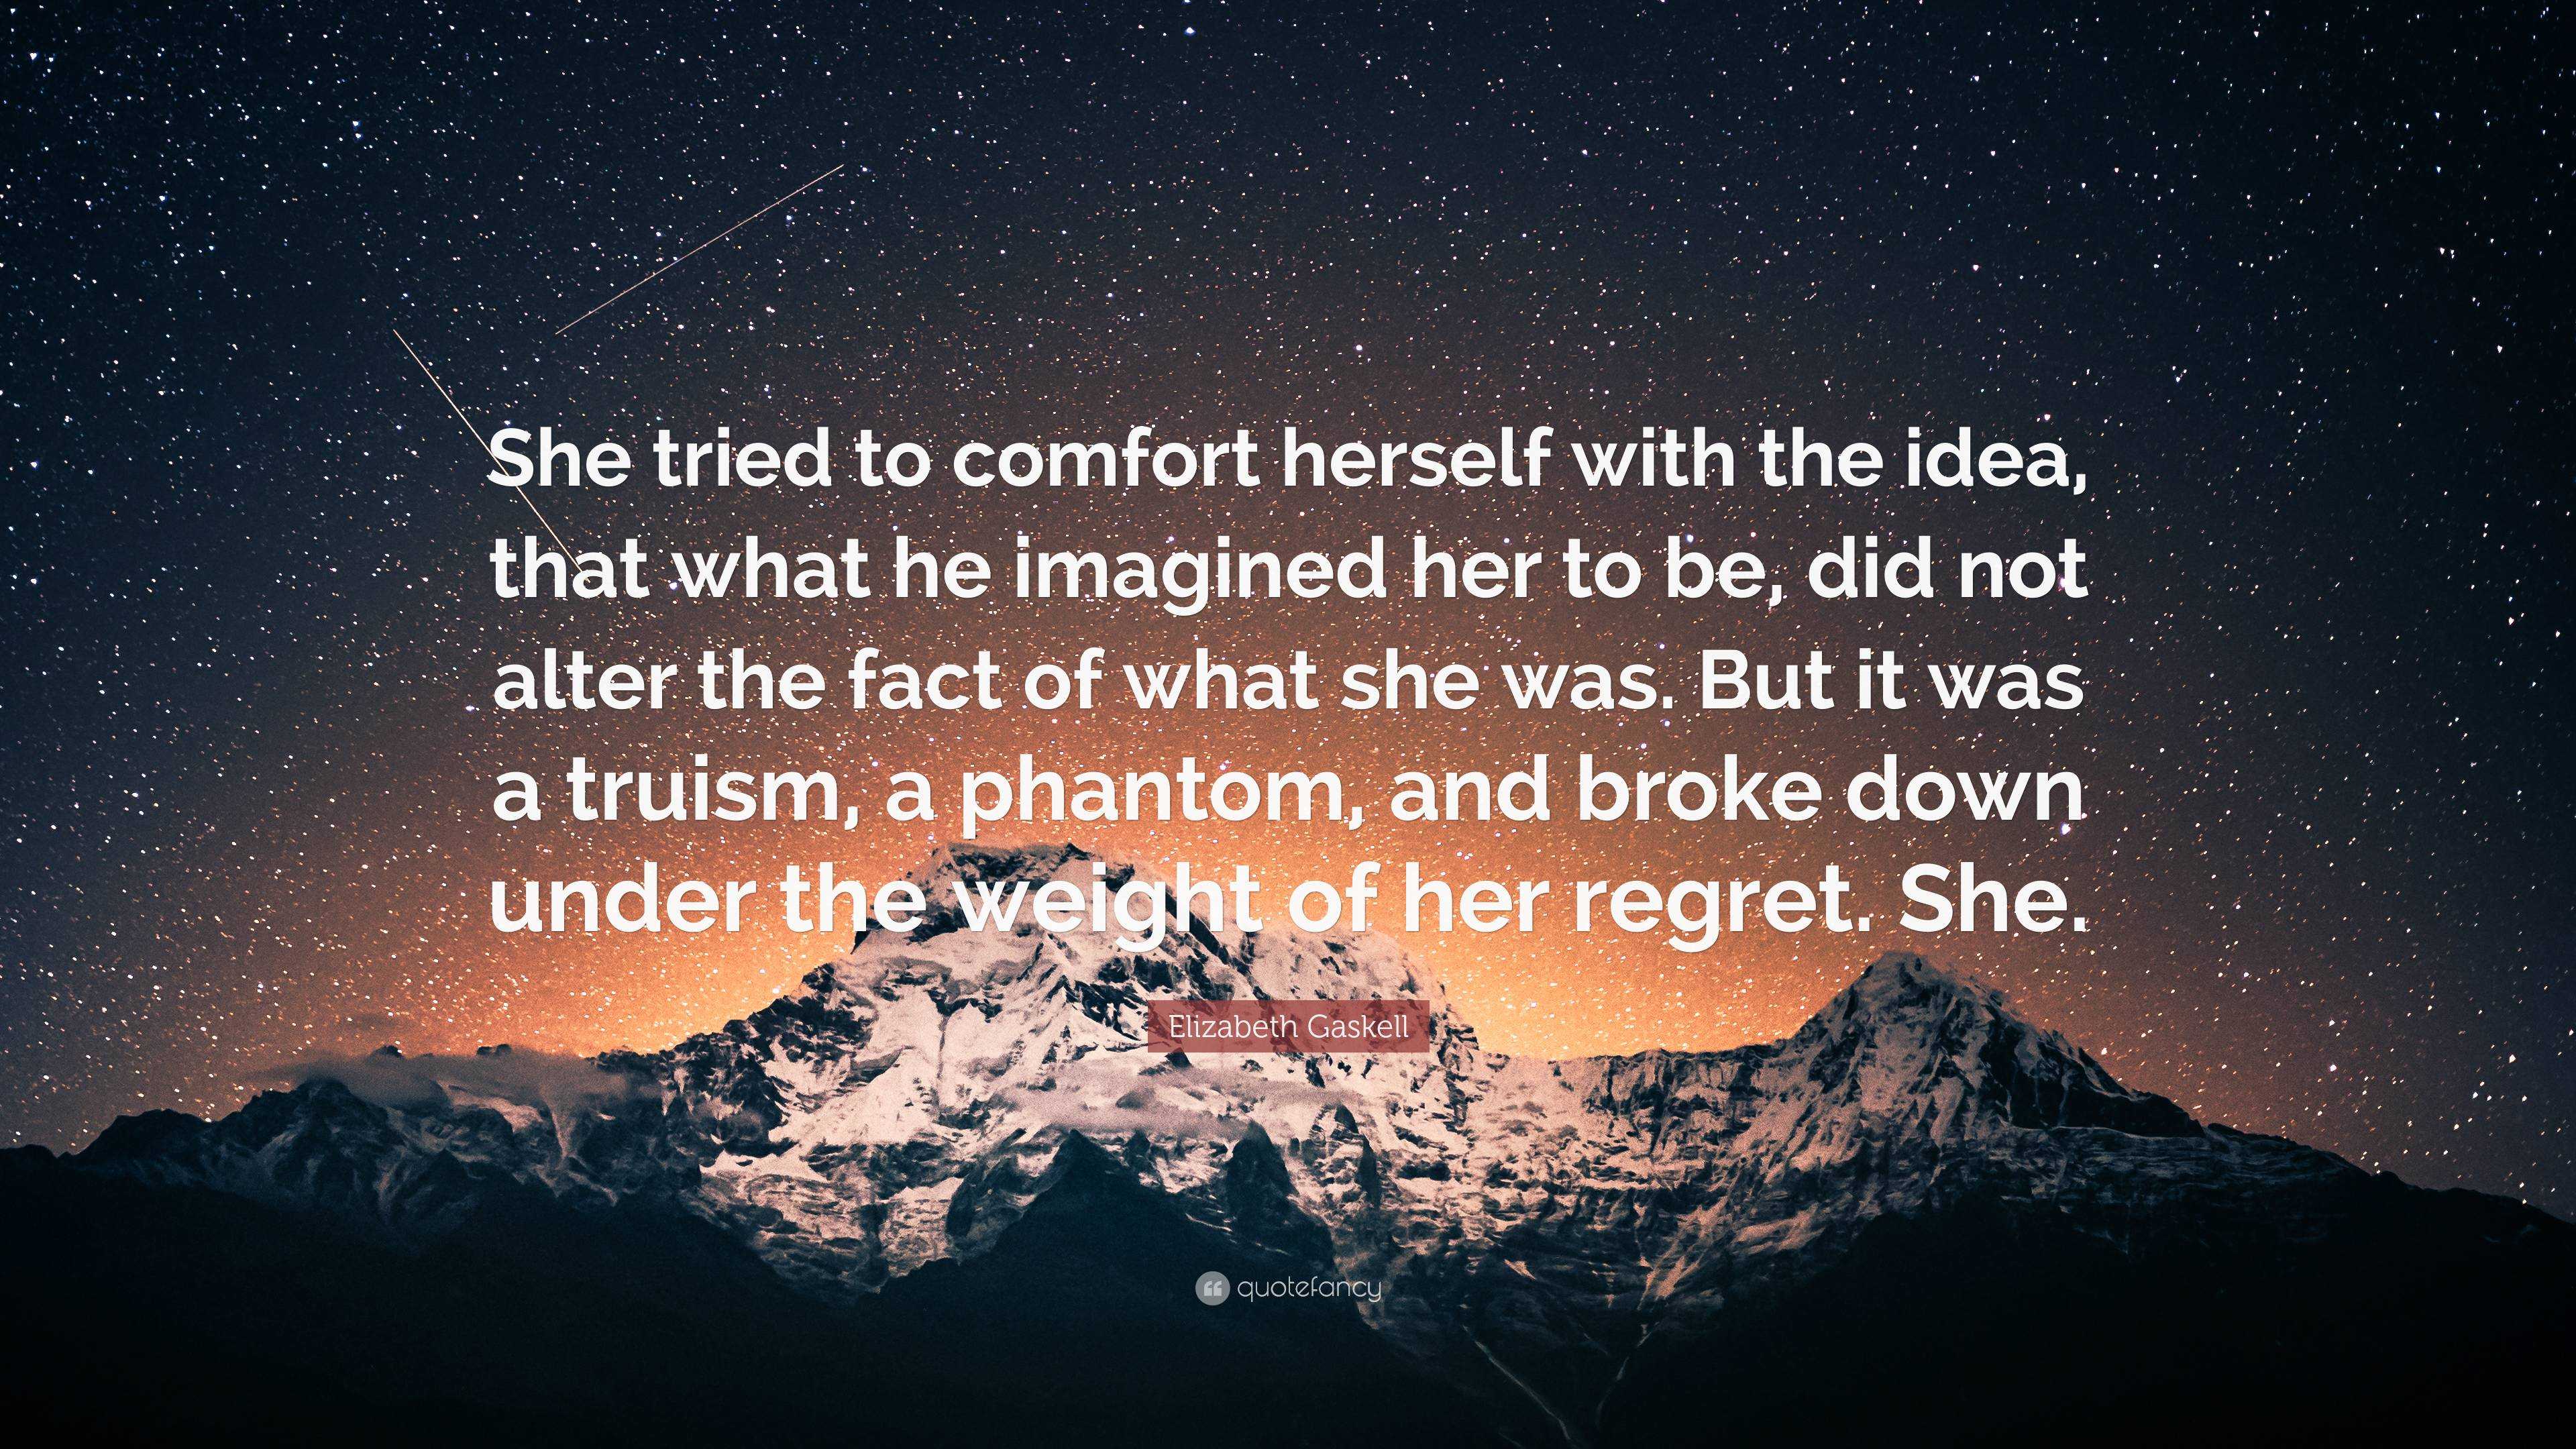 Elizabeth Gaskell Quote: “She tried to comfort herself with the idea ...